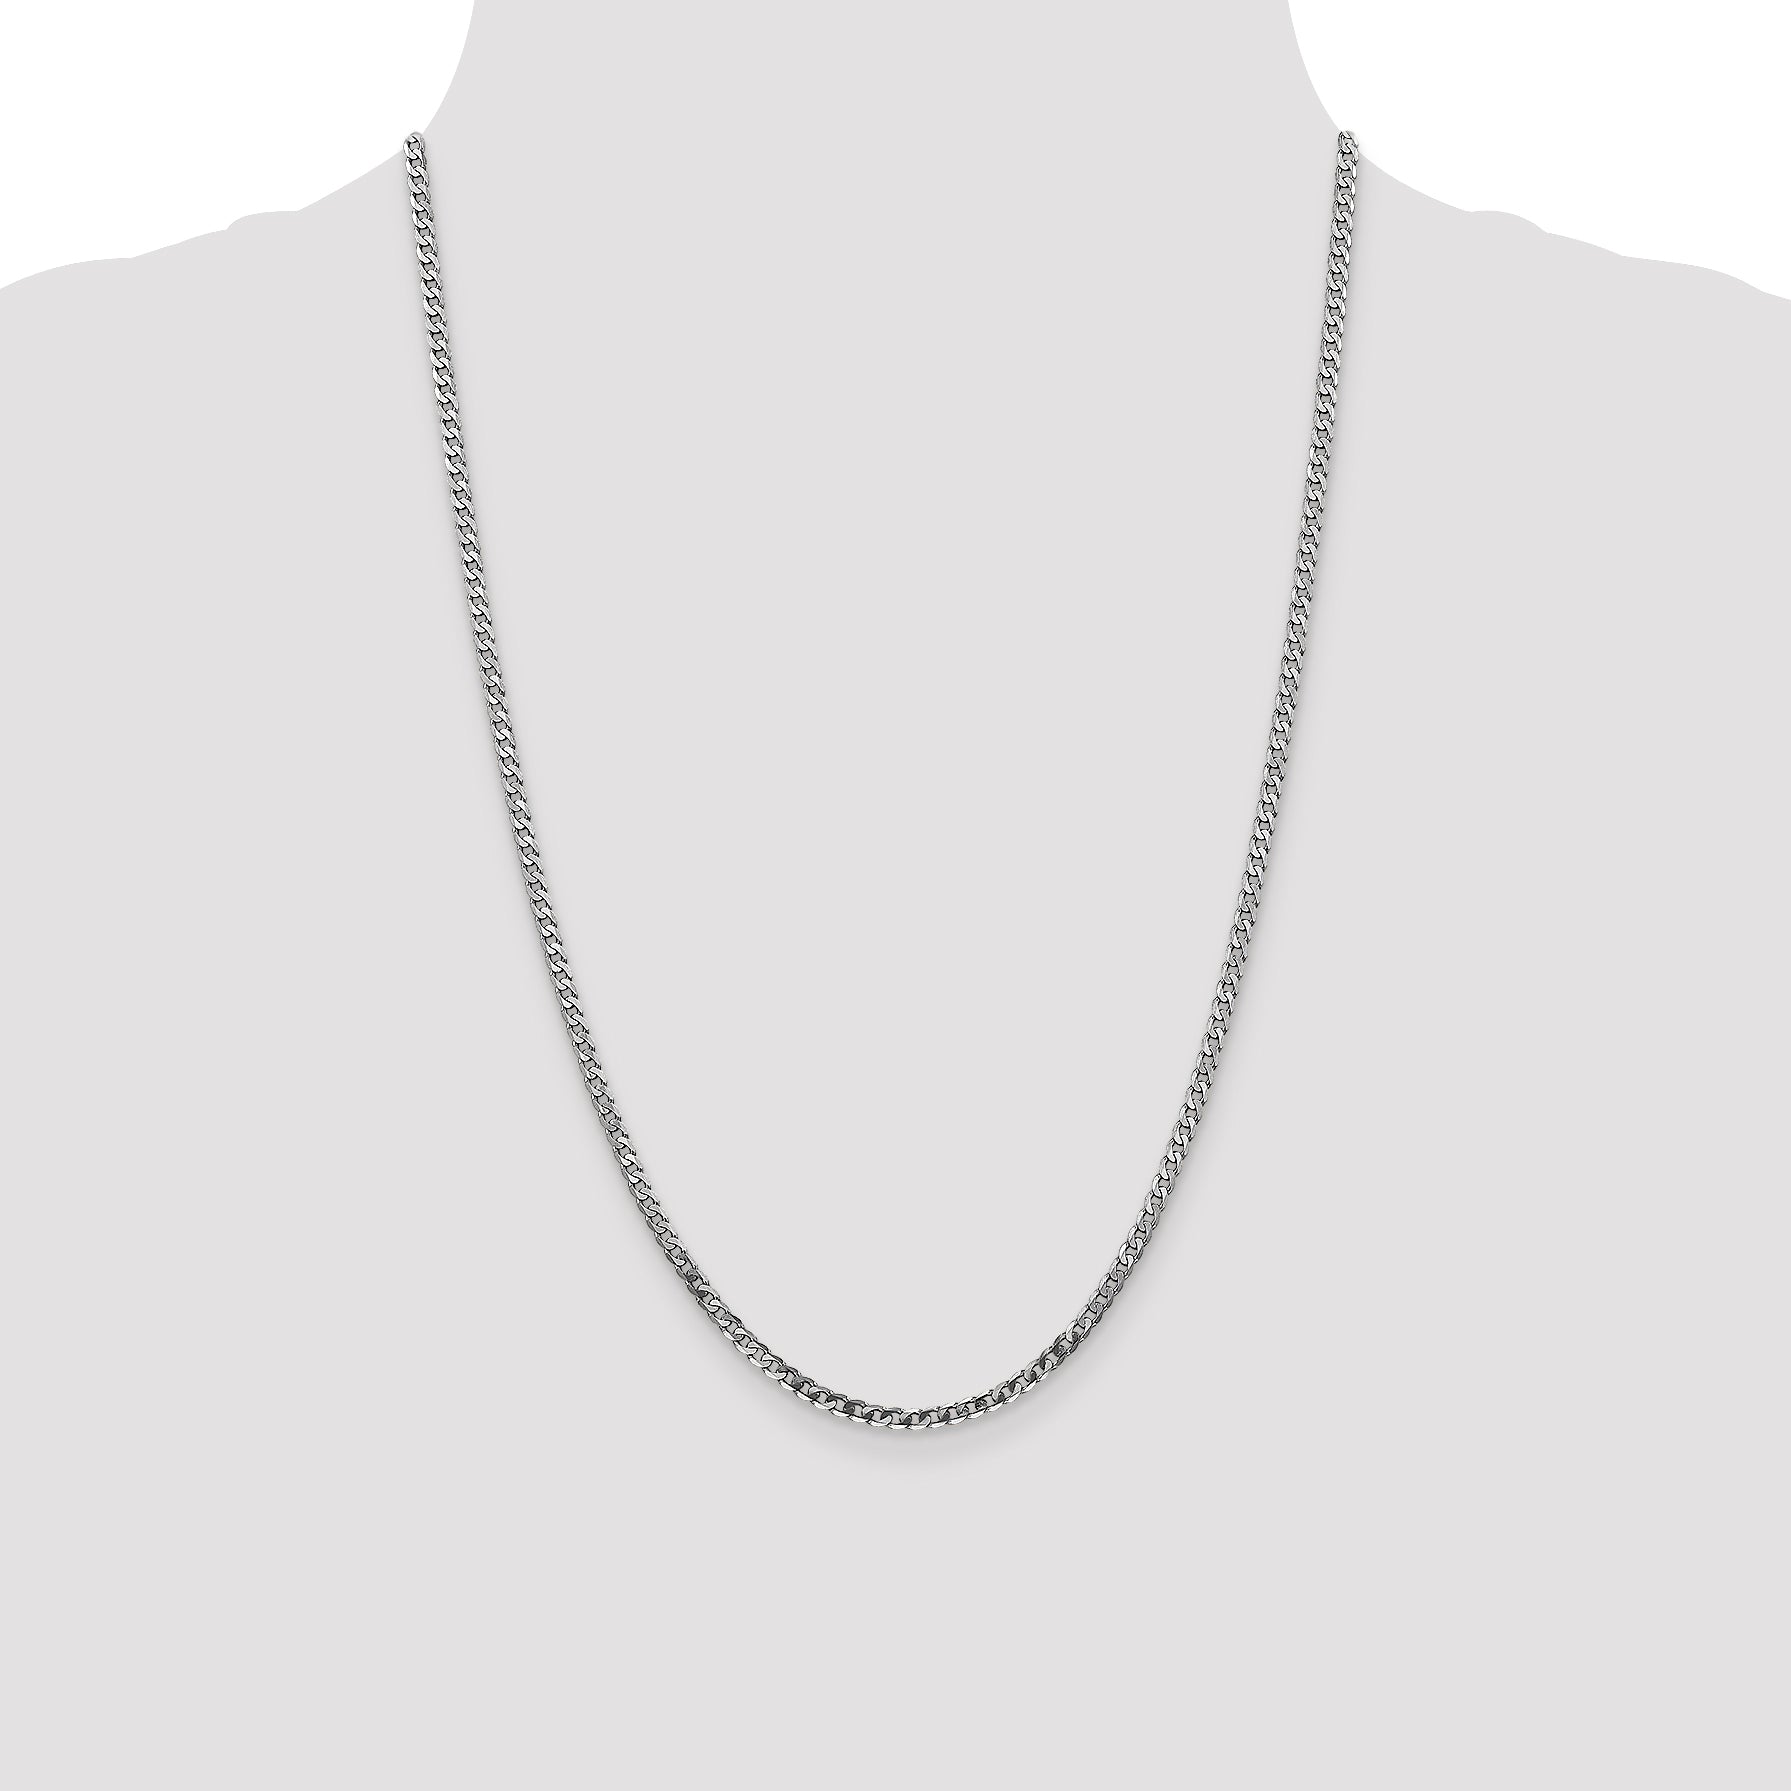 14K White Gold 16 inch 2.9mm Flat Beveled Curb with Lobster Clasp Chain